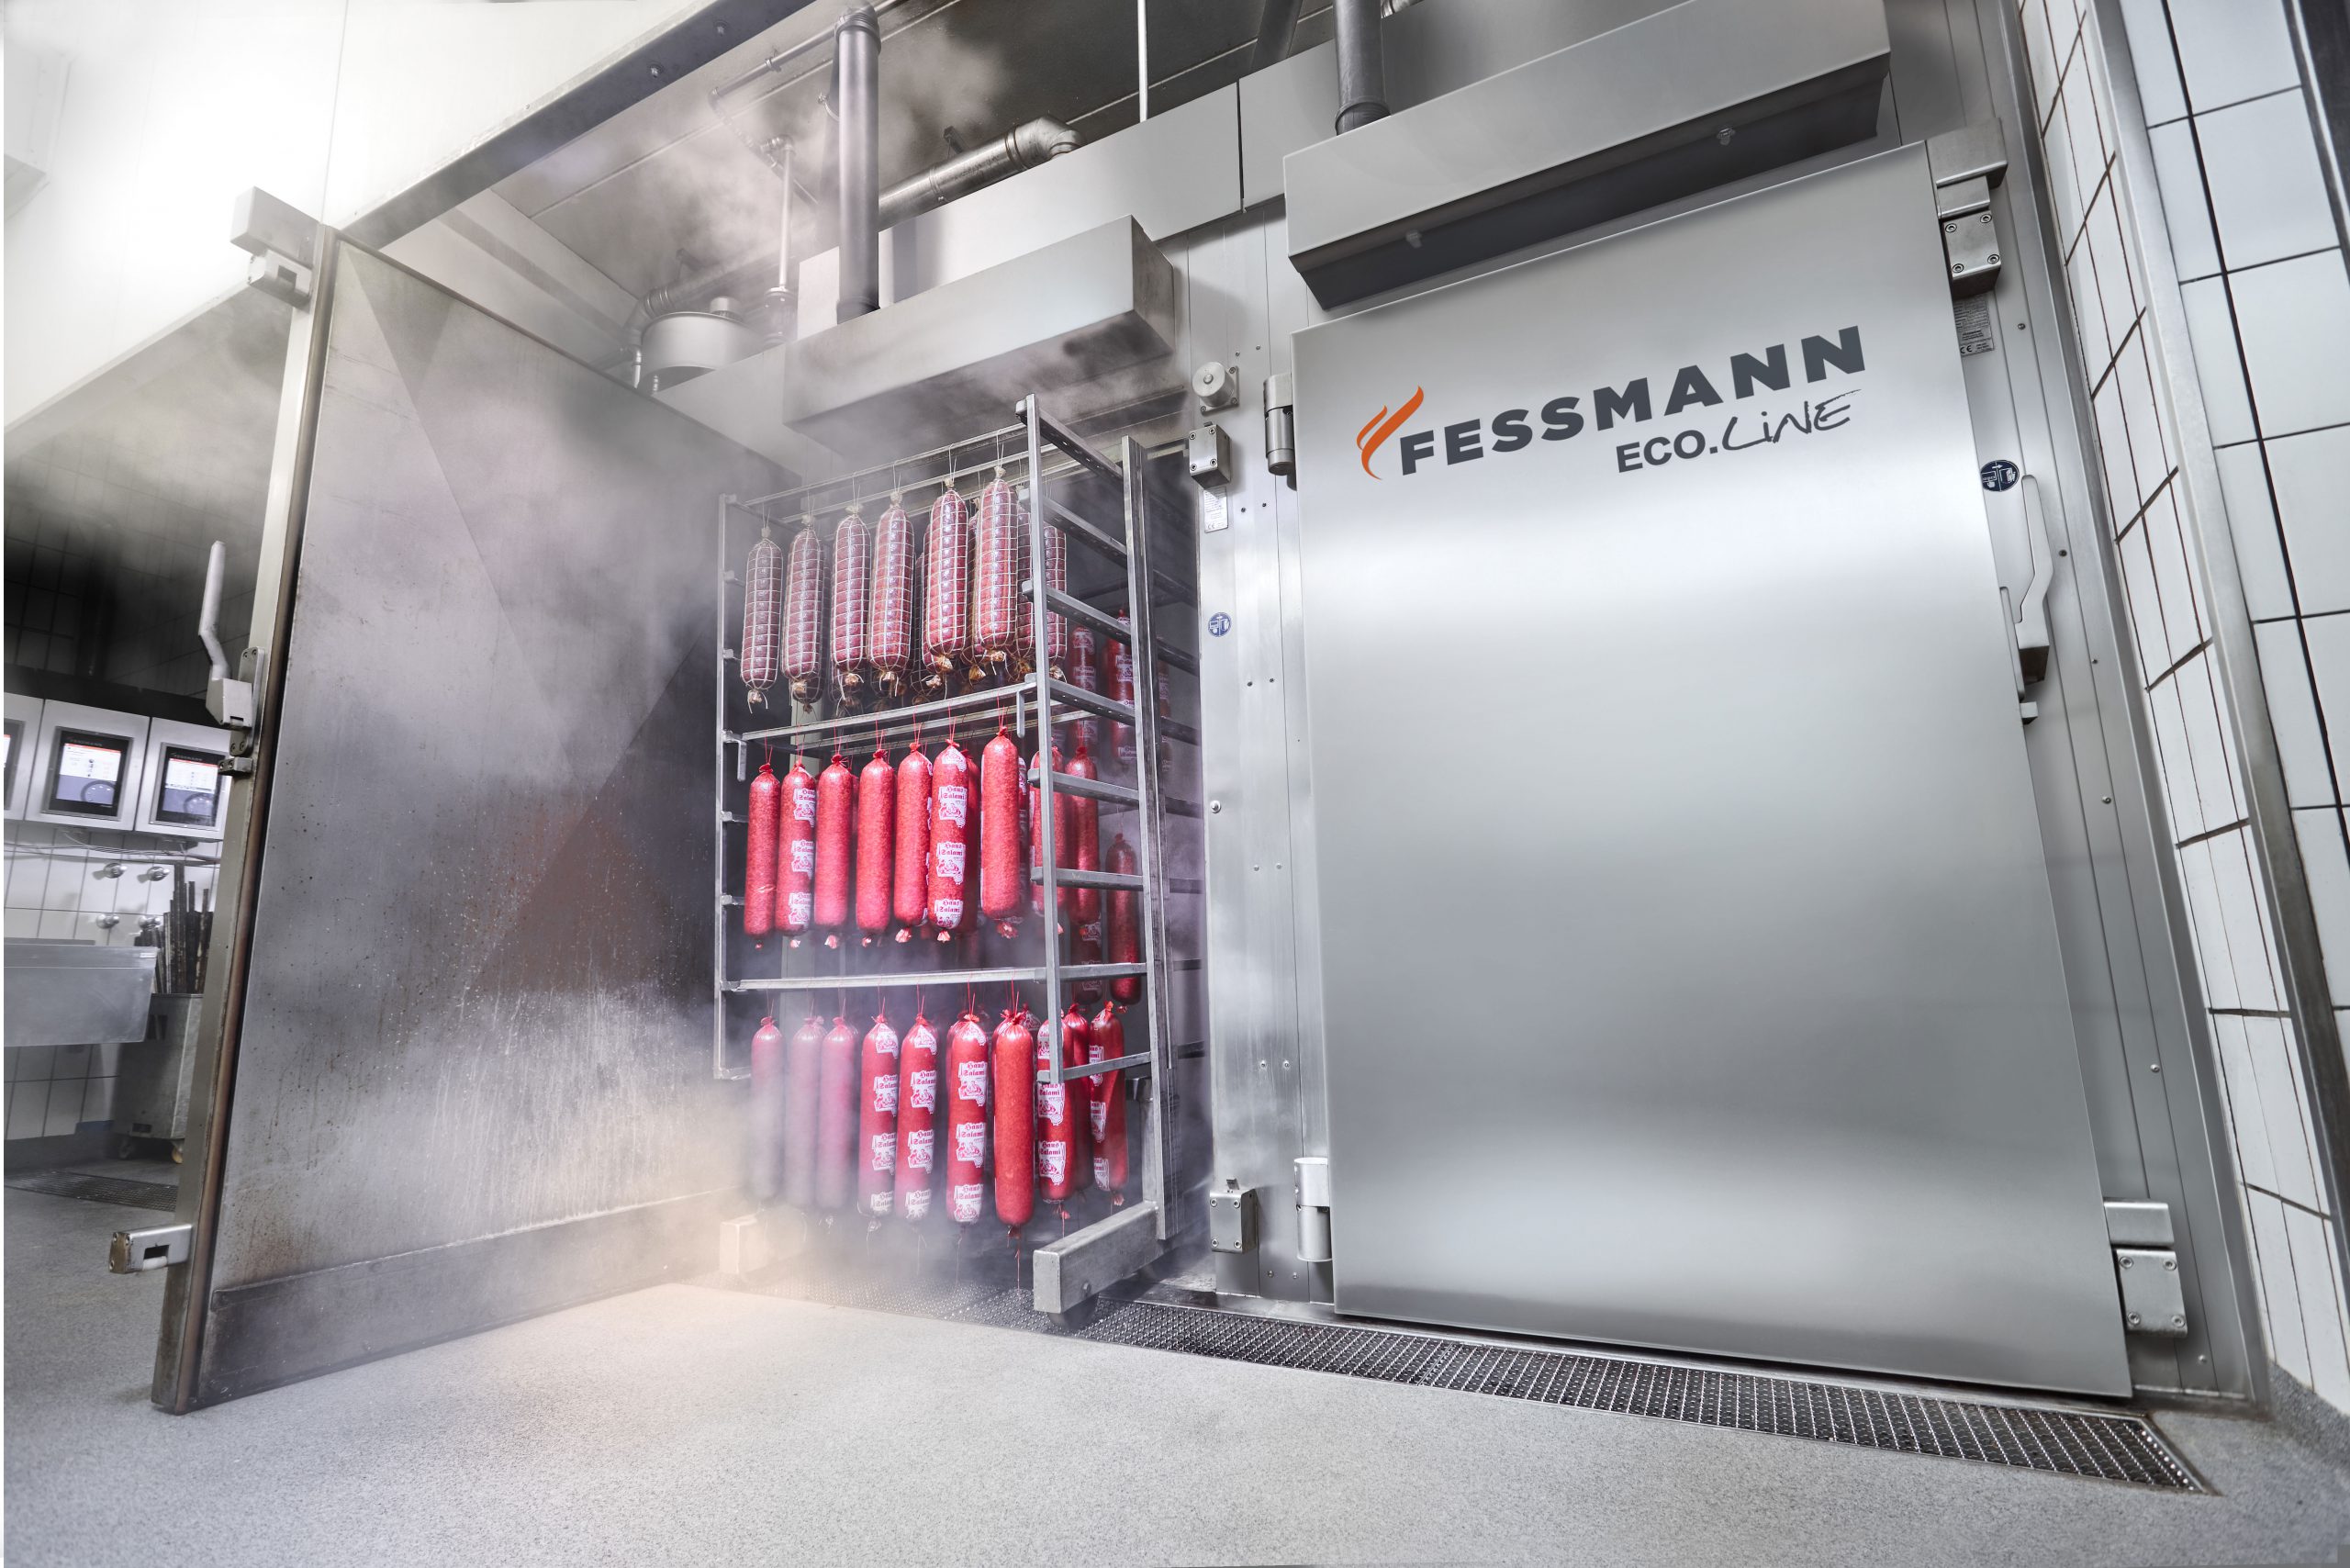 fessmann ecoline smokehouse being loaded with smoked products 